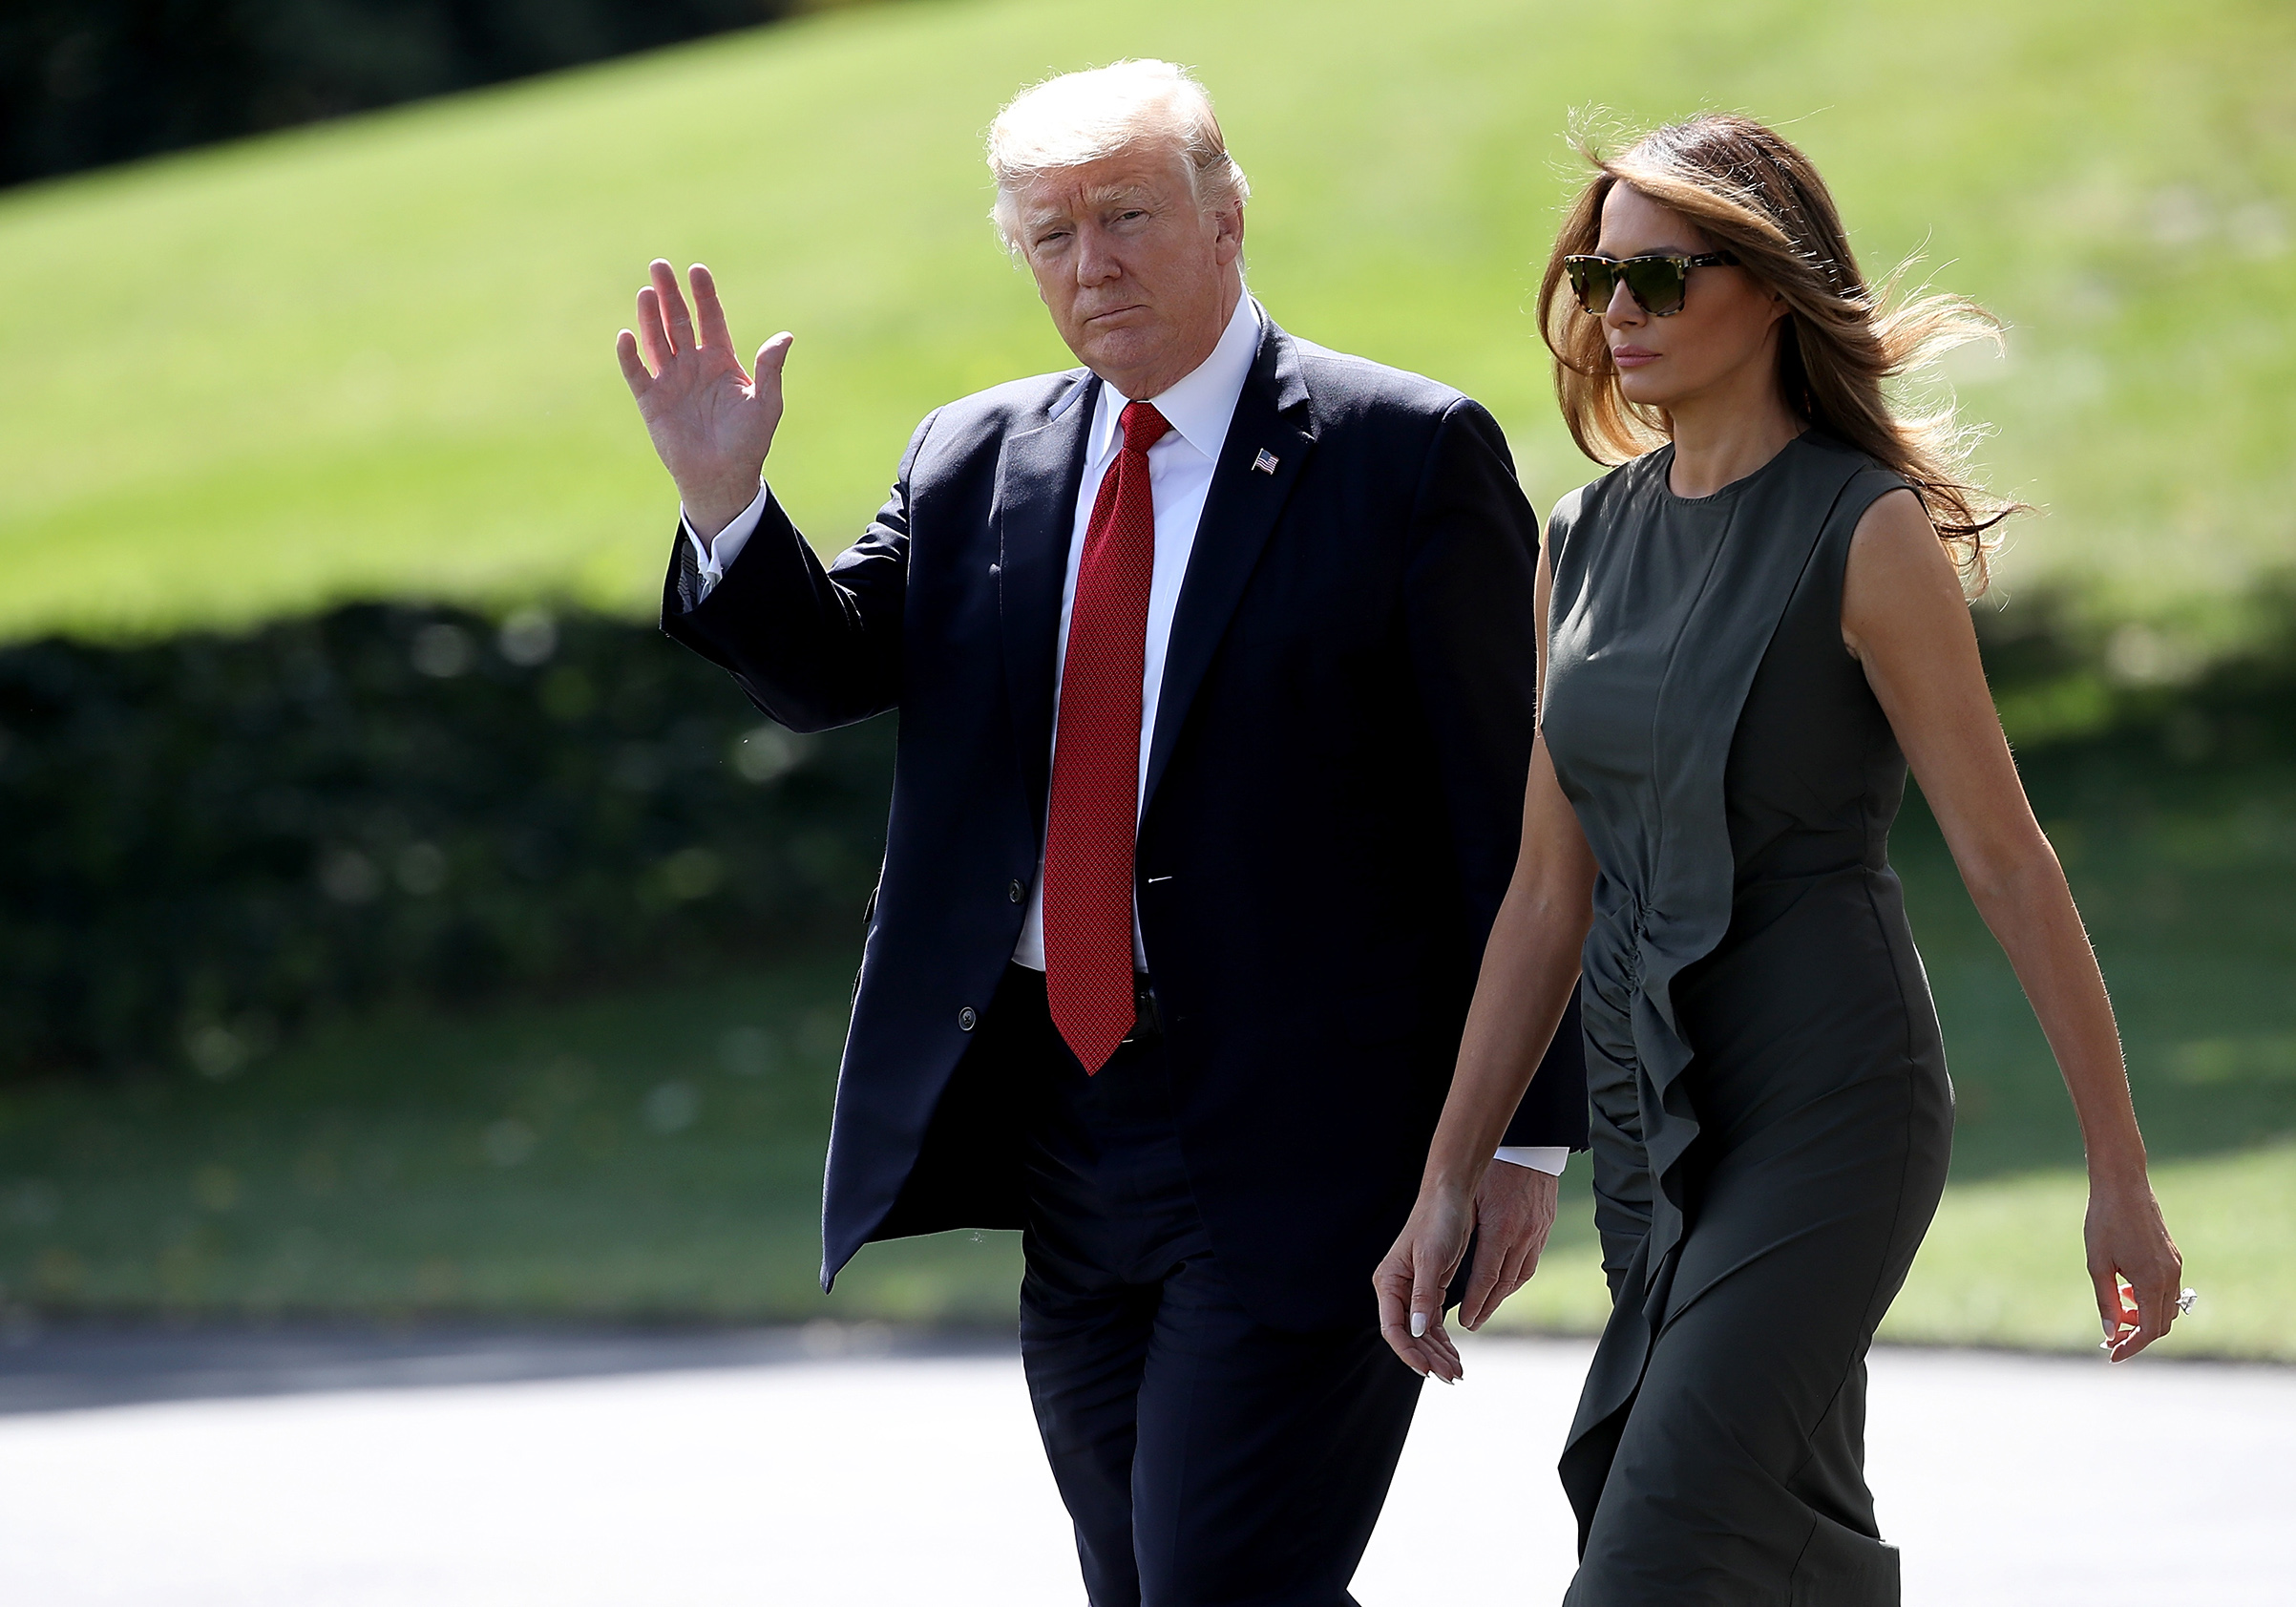 President Donald Trump, accompanied by first lady Melania Trump in a green ruffled dress, departs the White House for Camp David September 8, 2017 in Washington, DC.